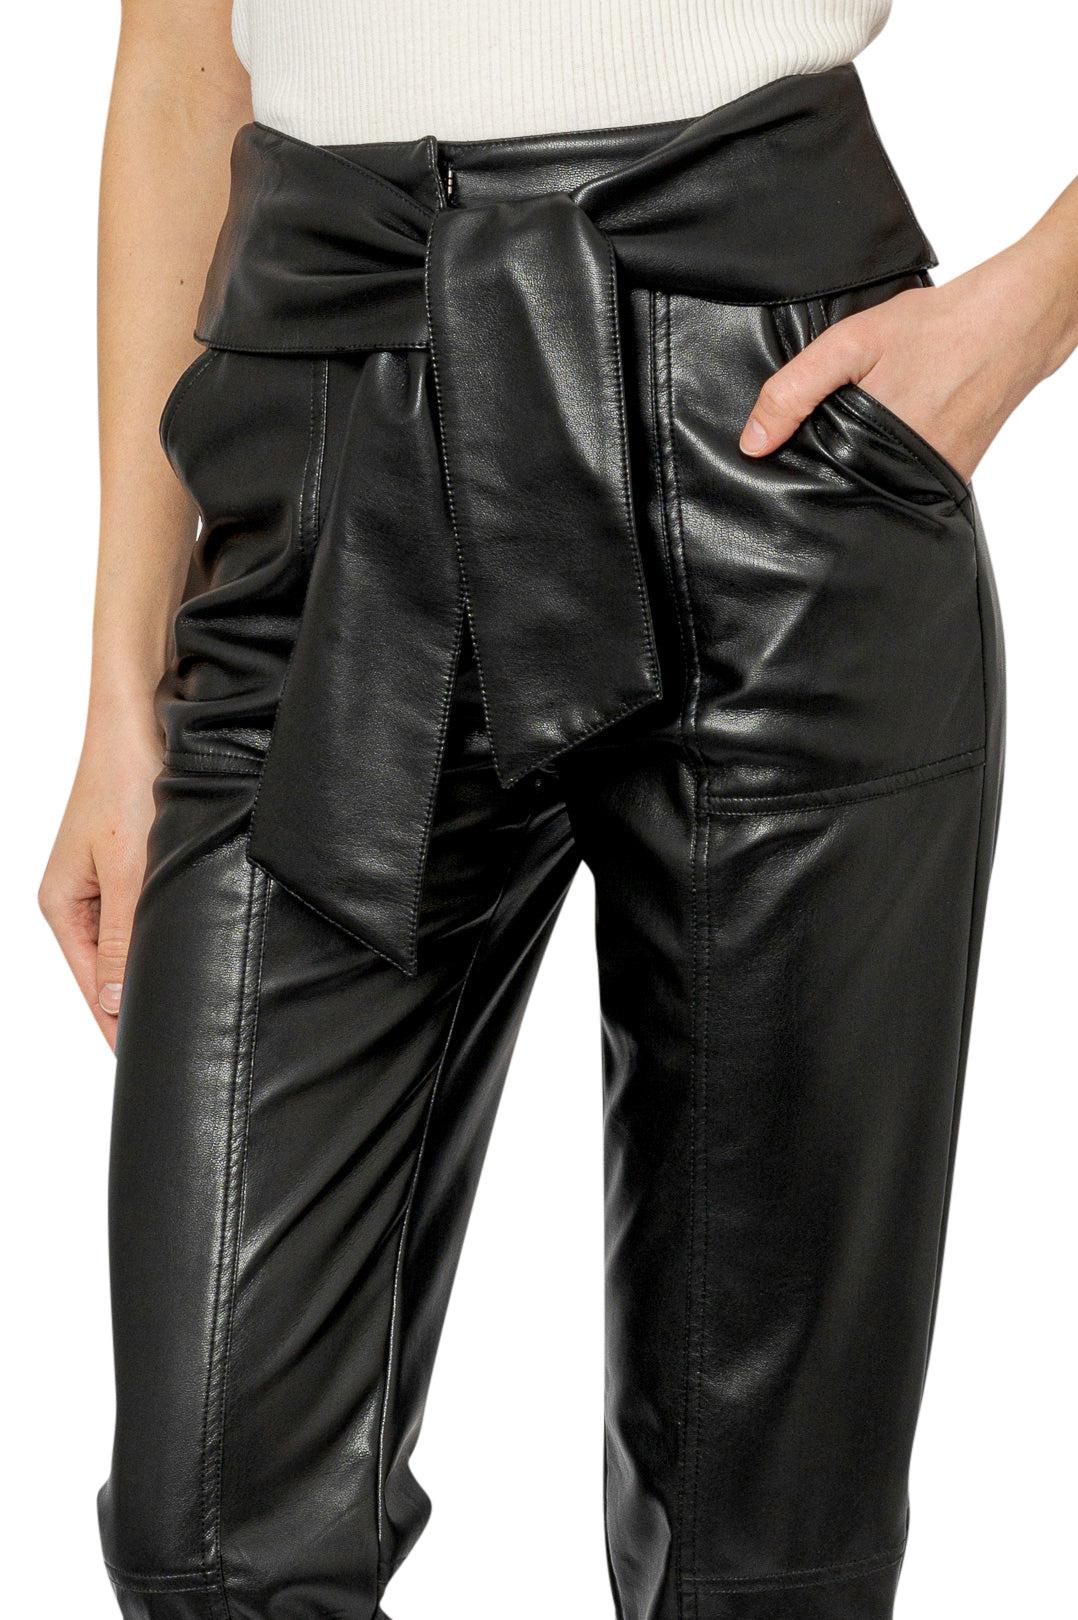 Simkhai-Eco-leather trousers-dgallerystore